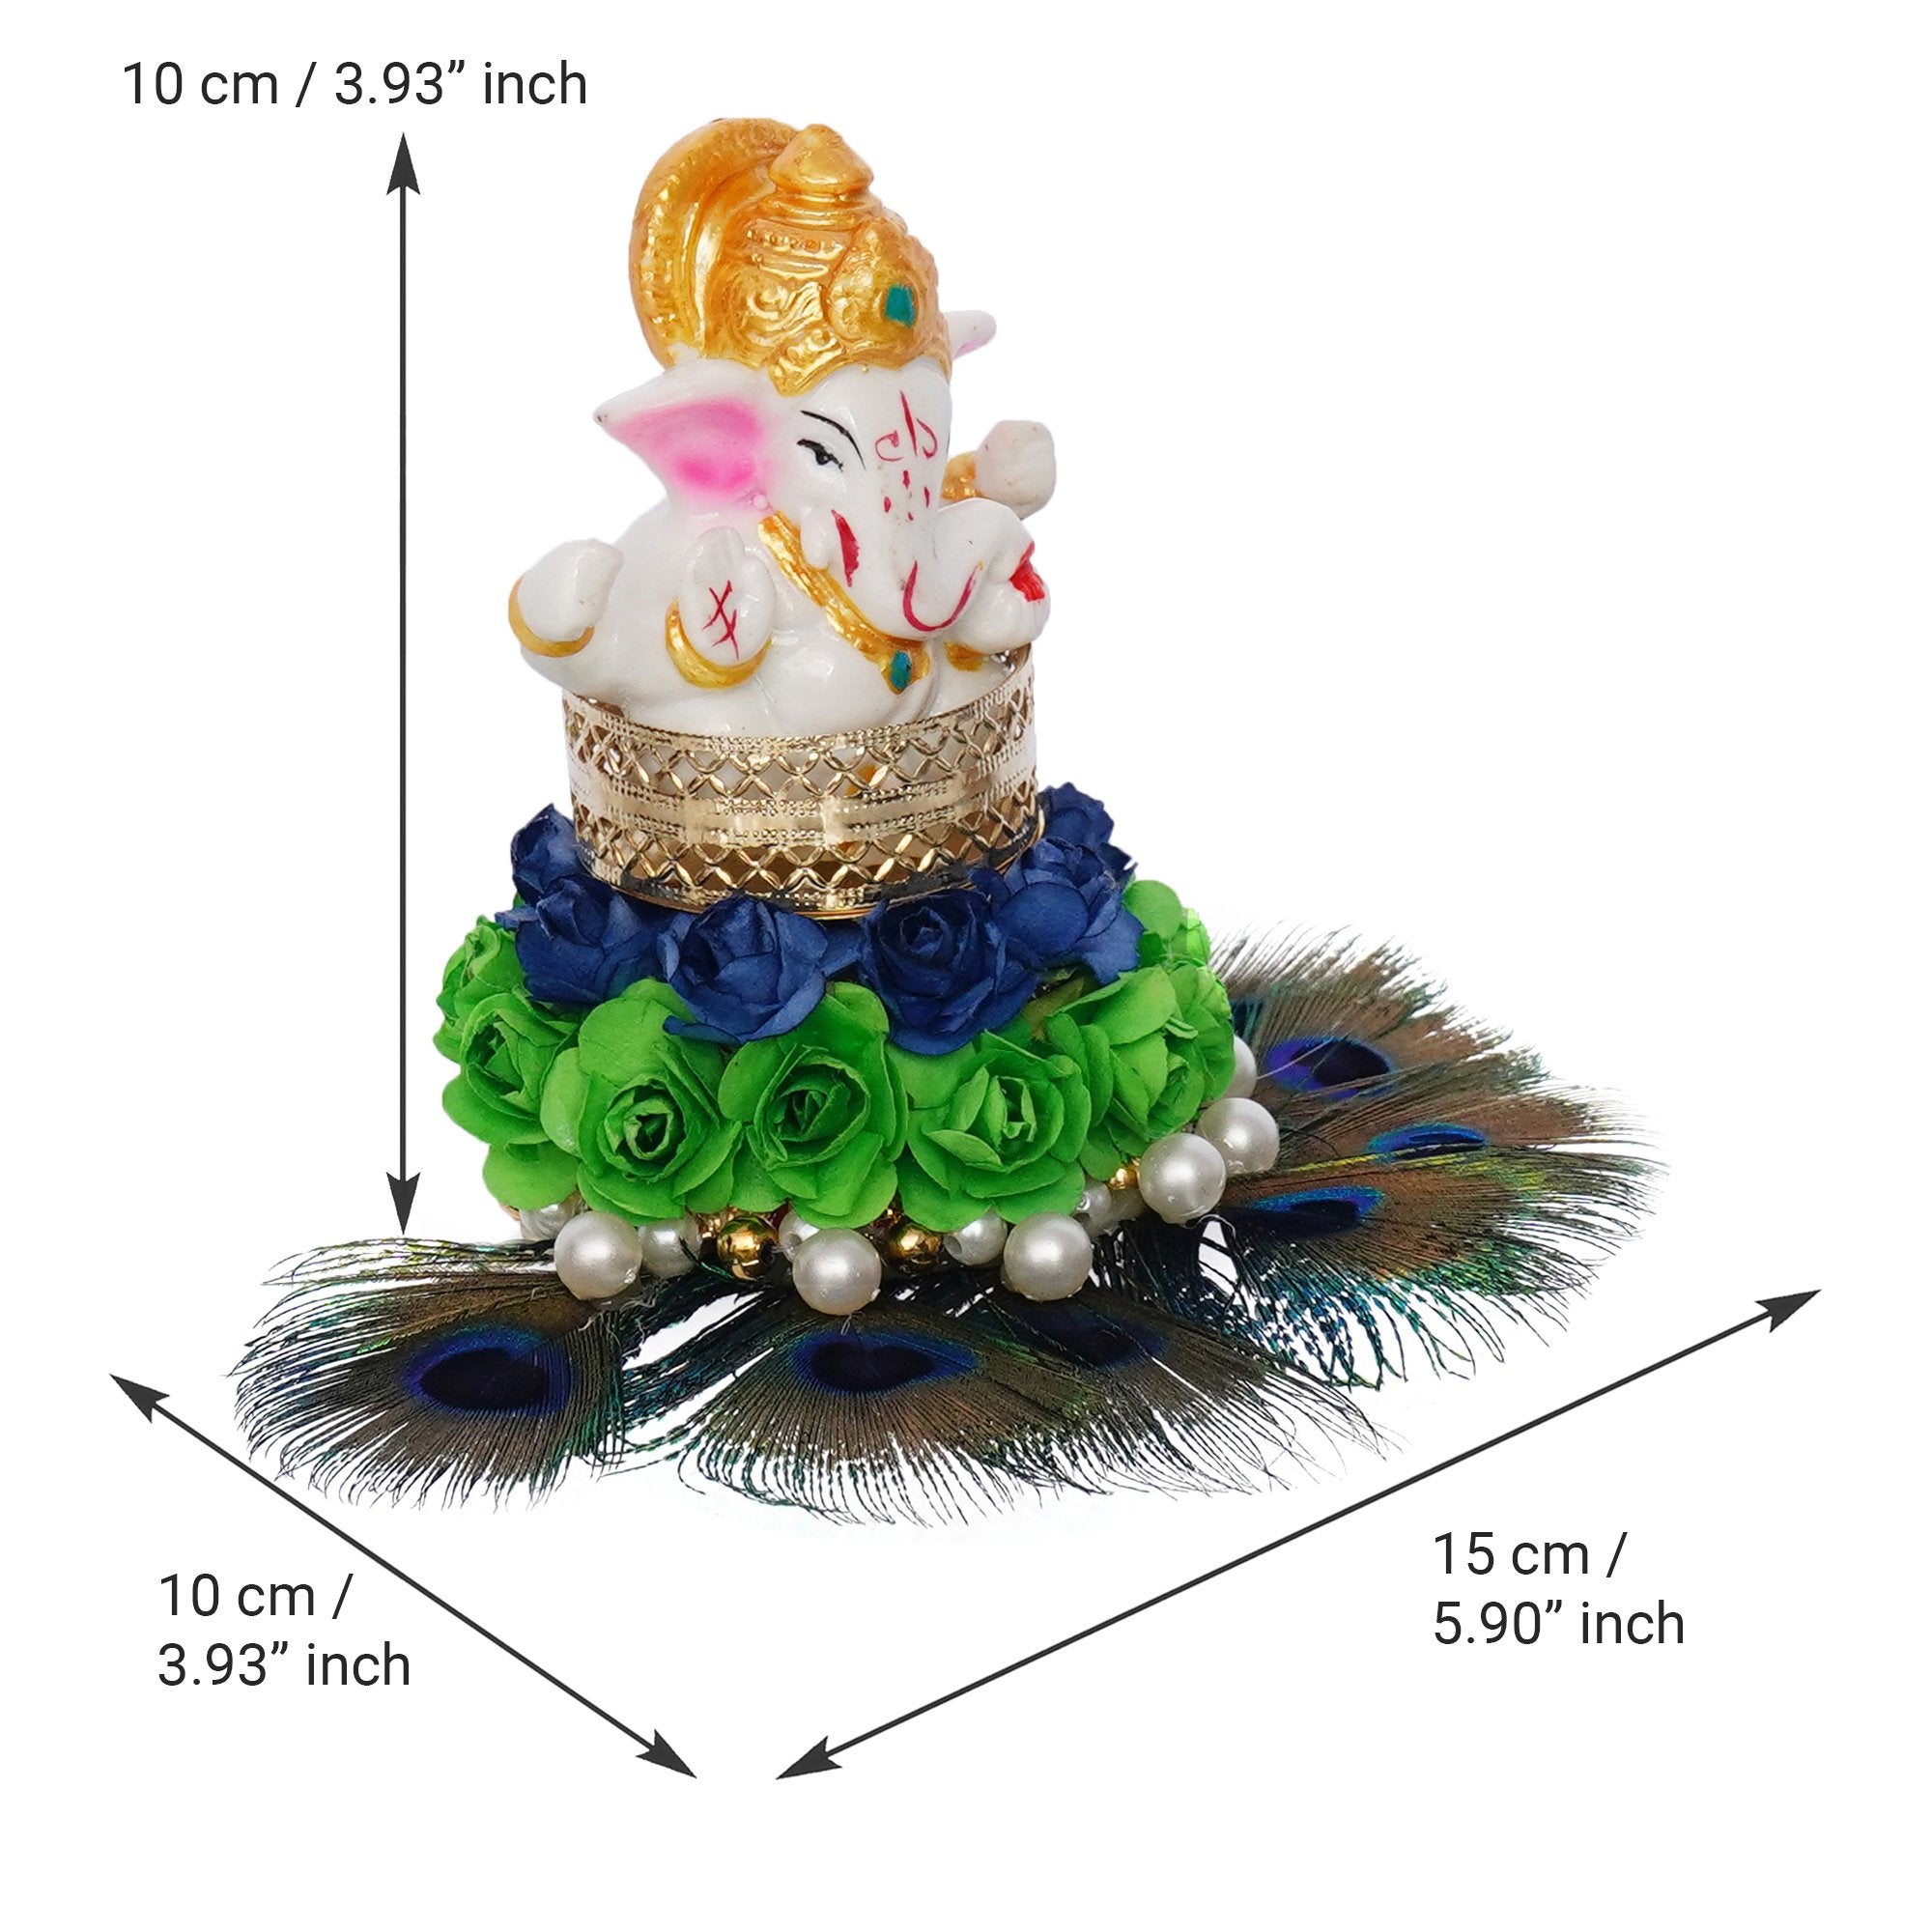 Lord Ganesha Idol on Decorative Handcrafted Floral Plate with Peacock Feather for Home and Car 1